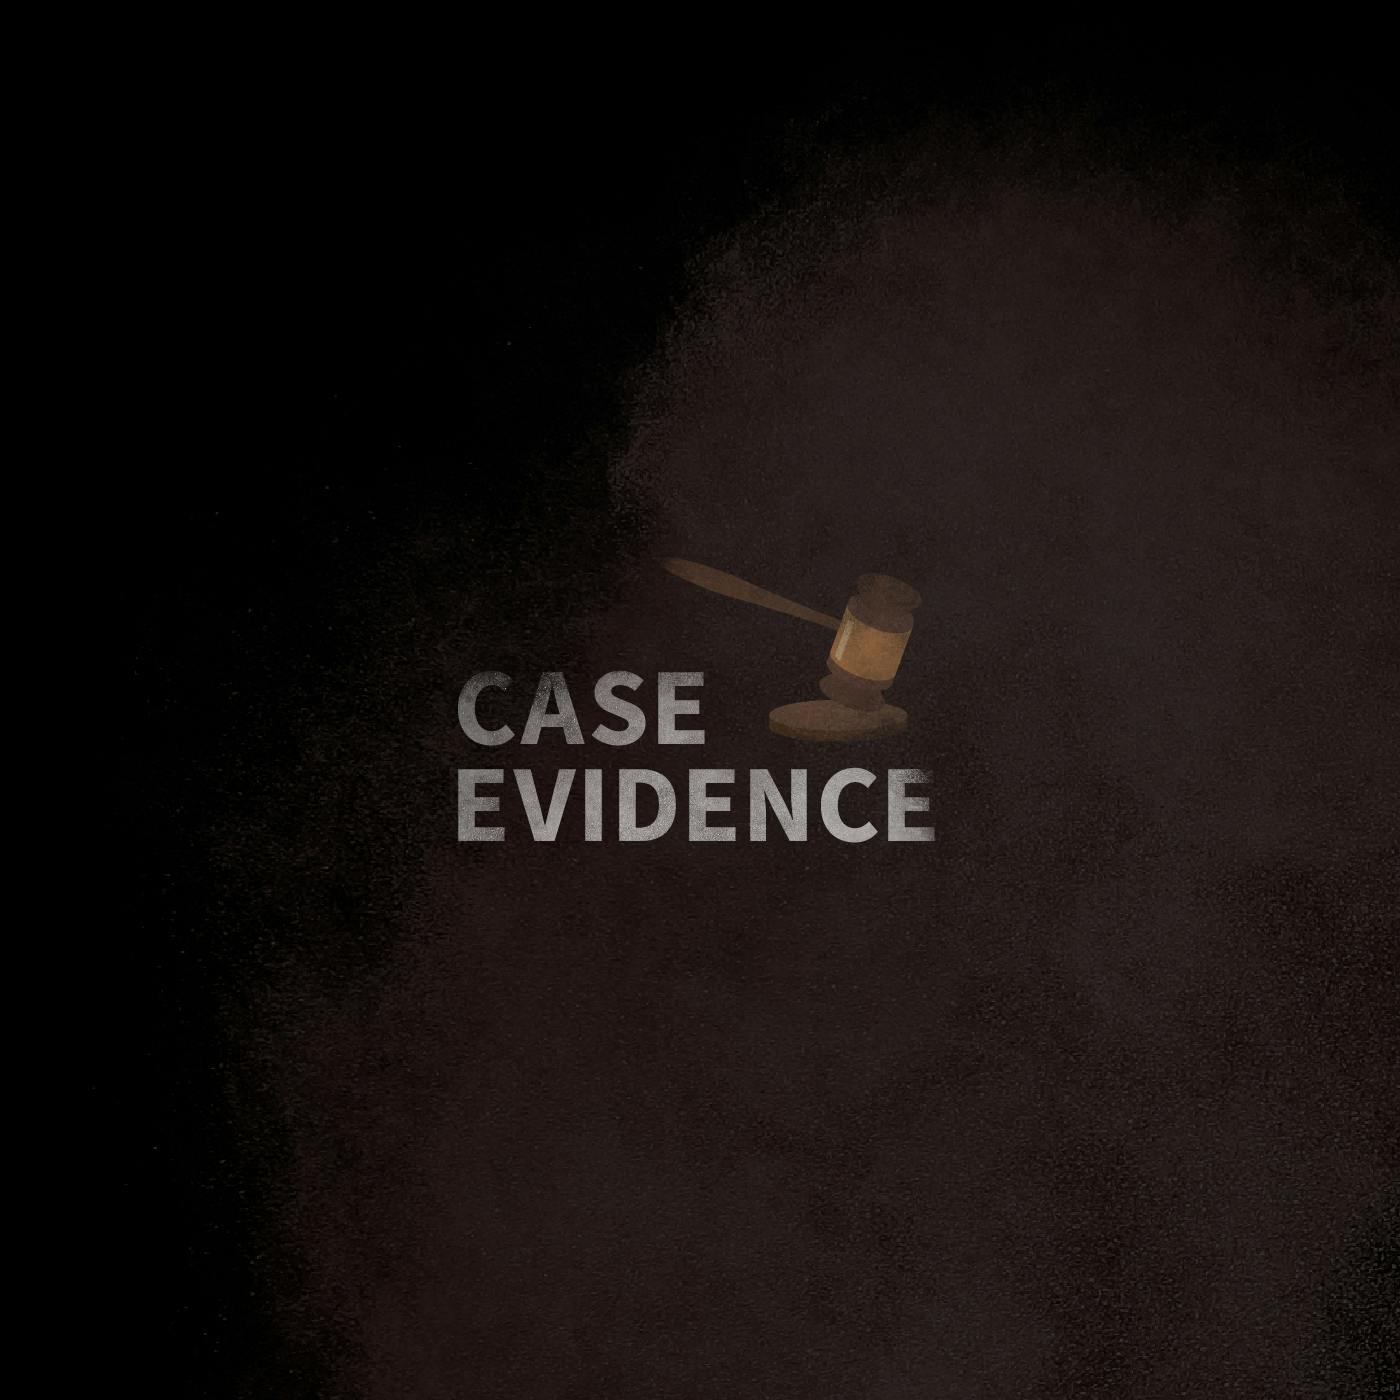 Case Evidence 07.24.17 by Tenderfoot TV